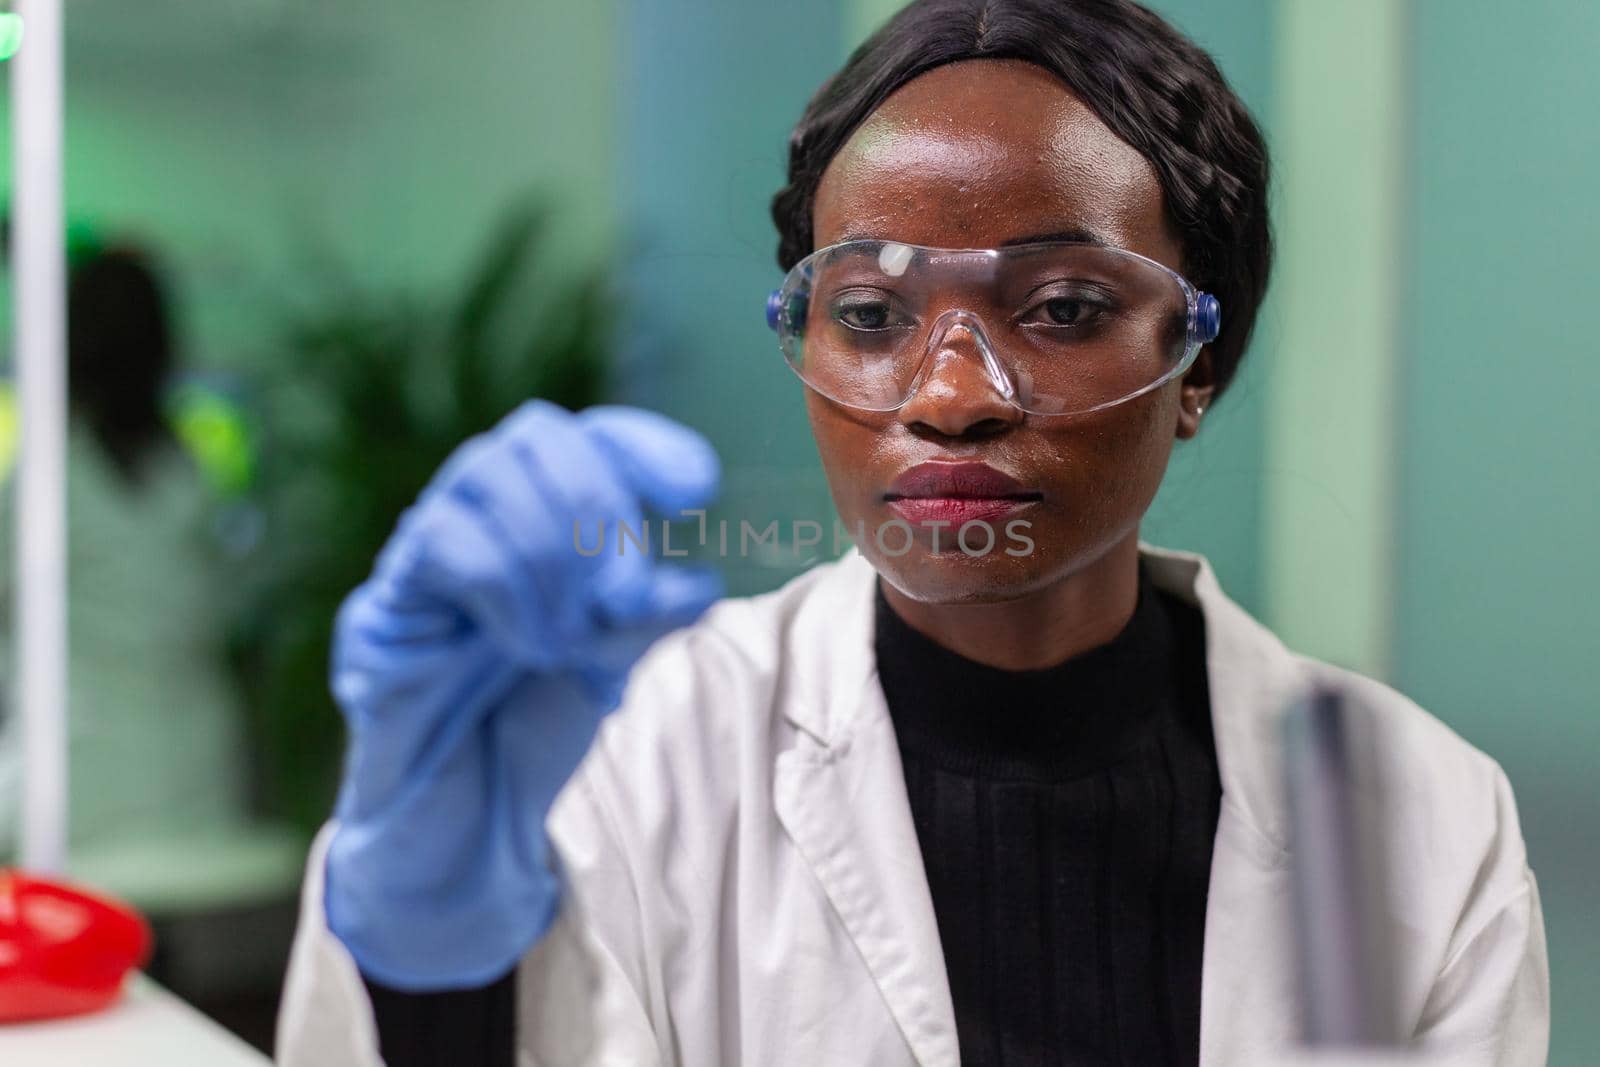 Botanist researcher scientist analyzing green liquid sample under microscope for microbiology experiment. Chemist specialist discovering organic gmo plants while working in pharmaceutical laboratory.